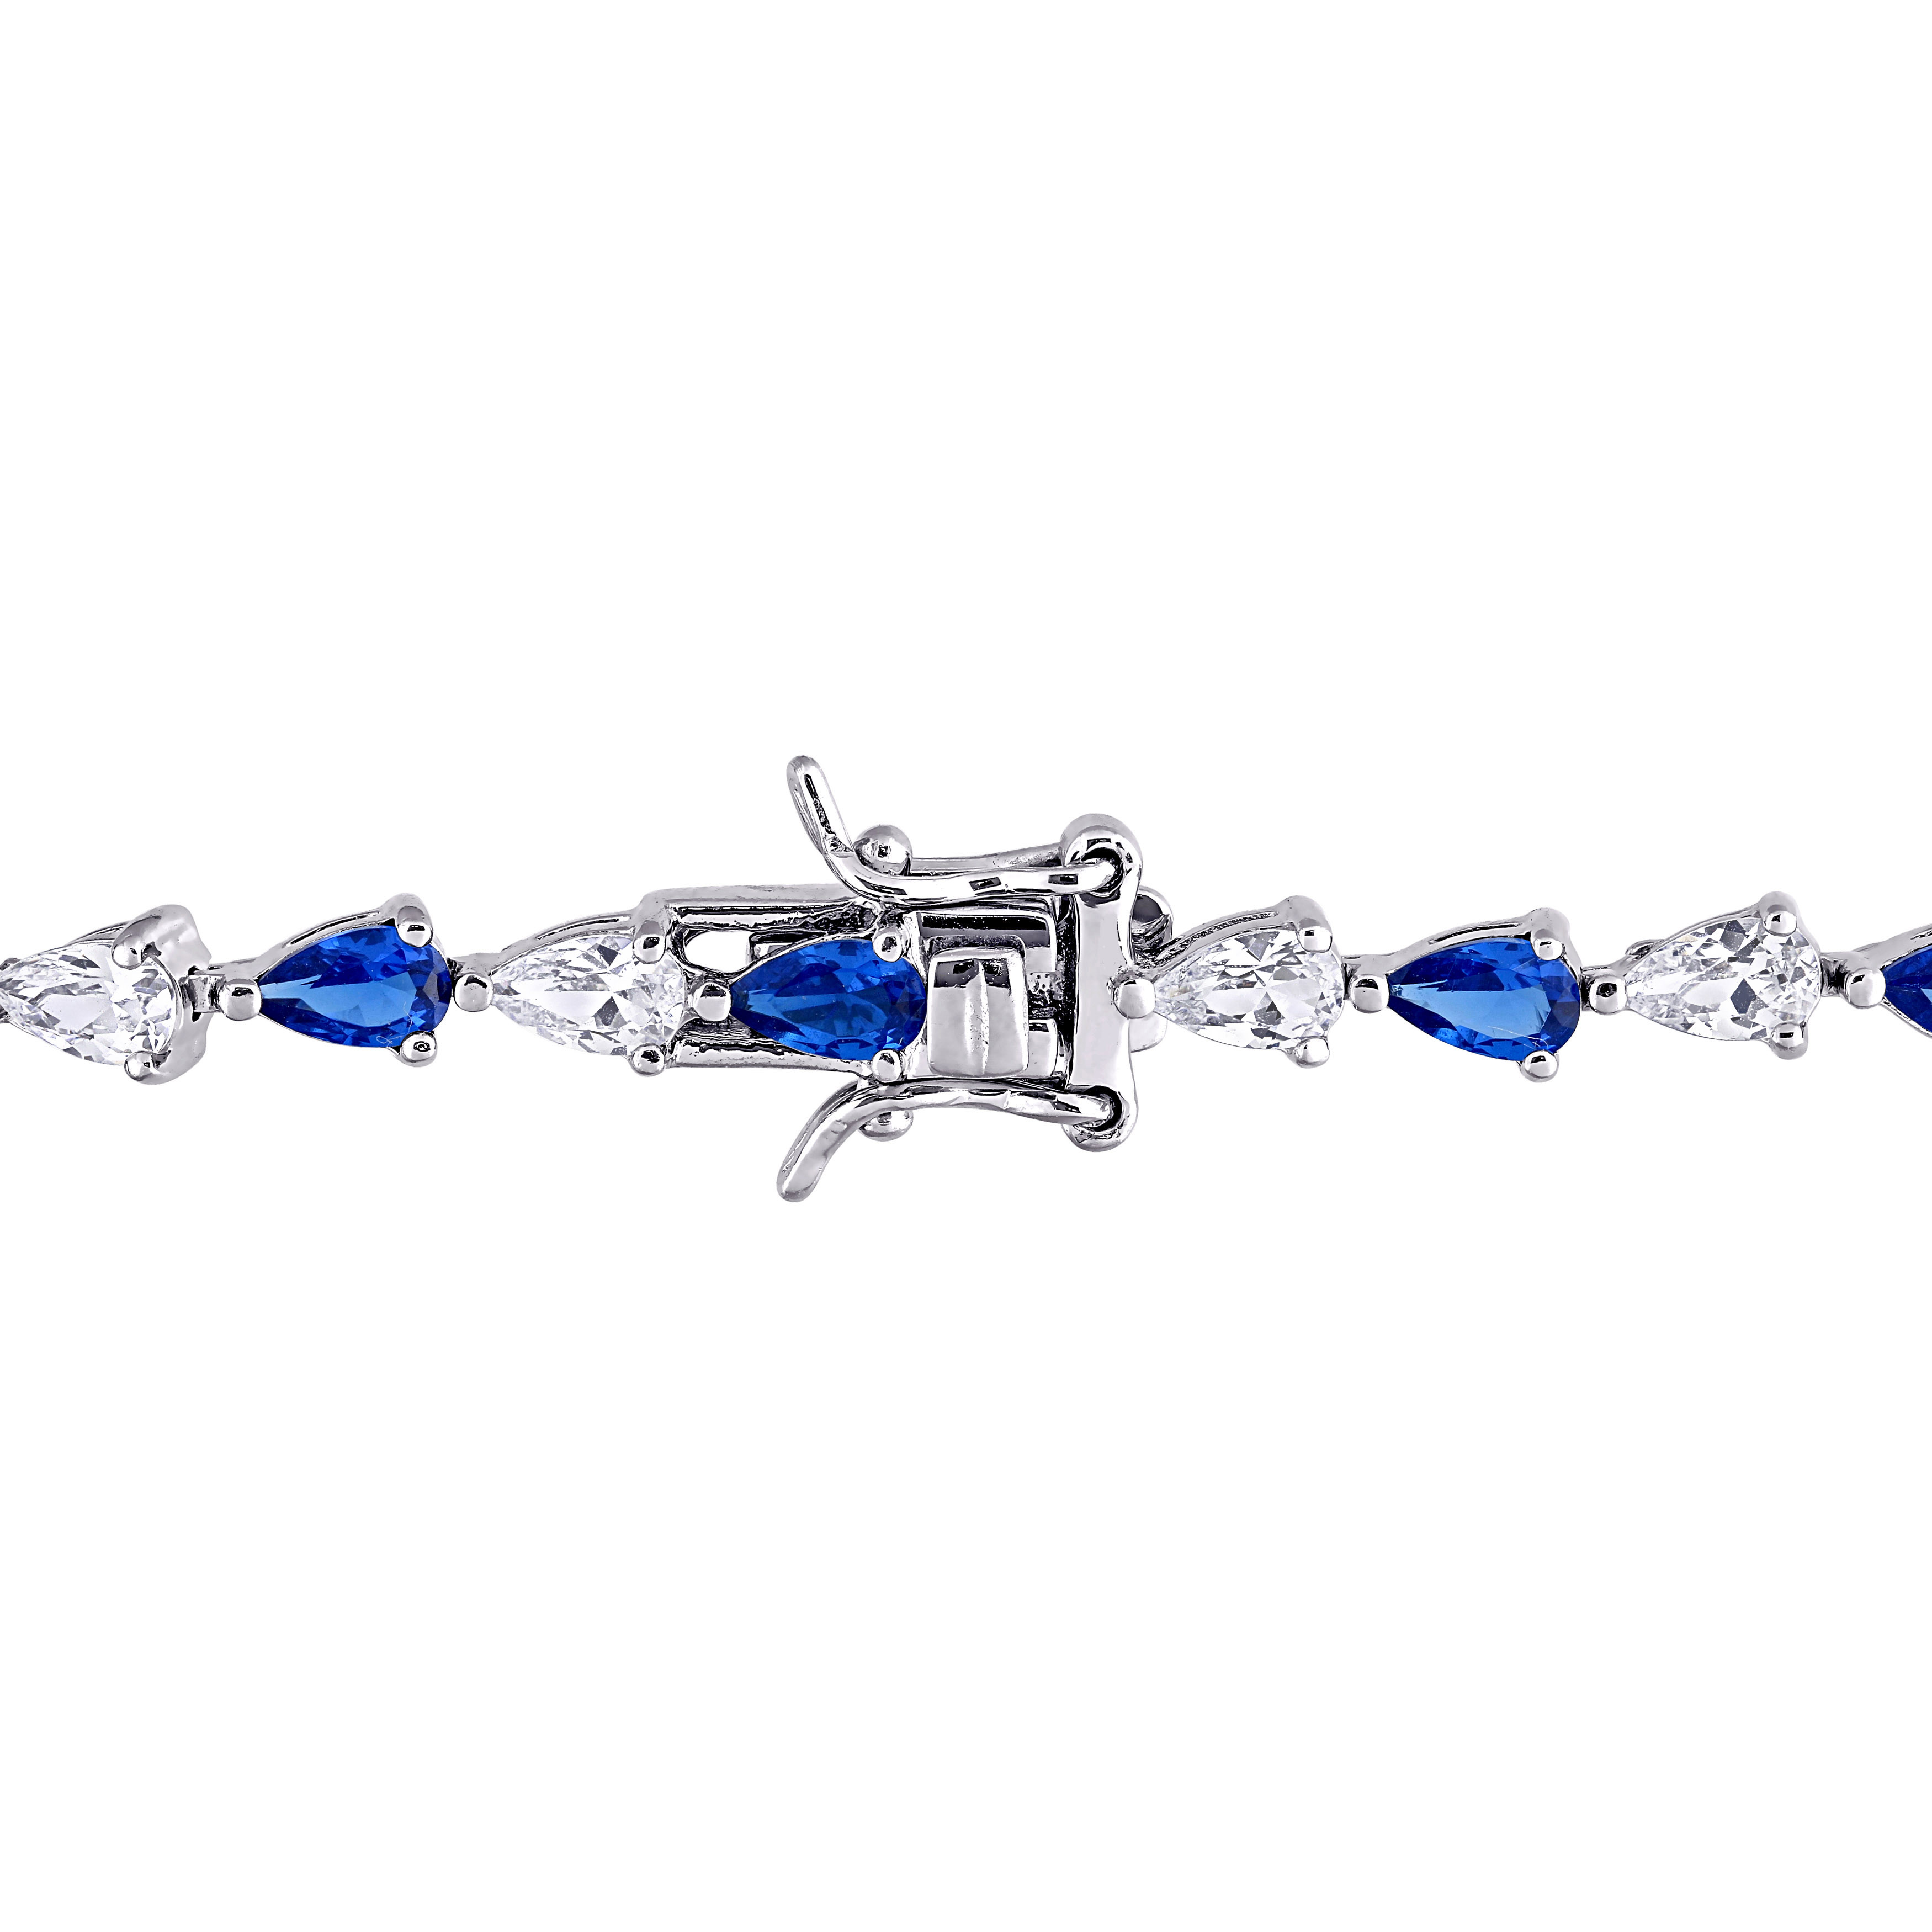 10 1/2 CT TGW Pear Shape Created Blue and White Sapphire Tennis Bracelet in Sterling Silver - 7 in.